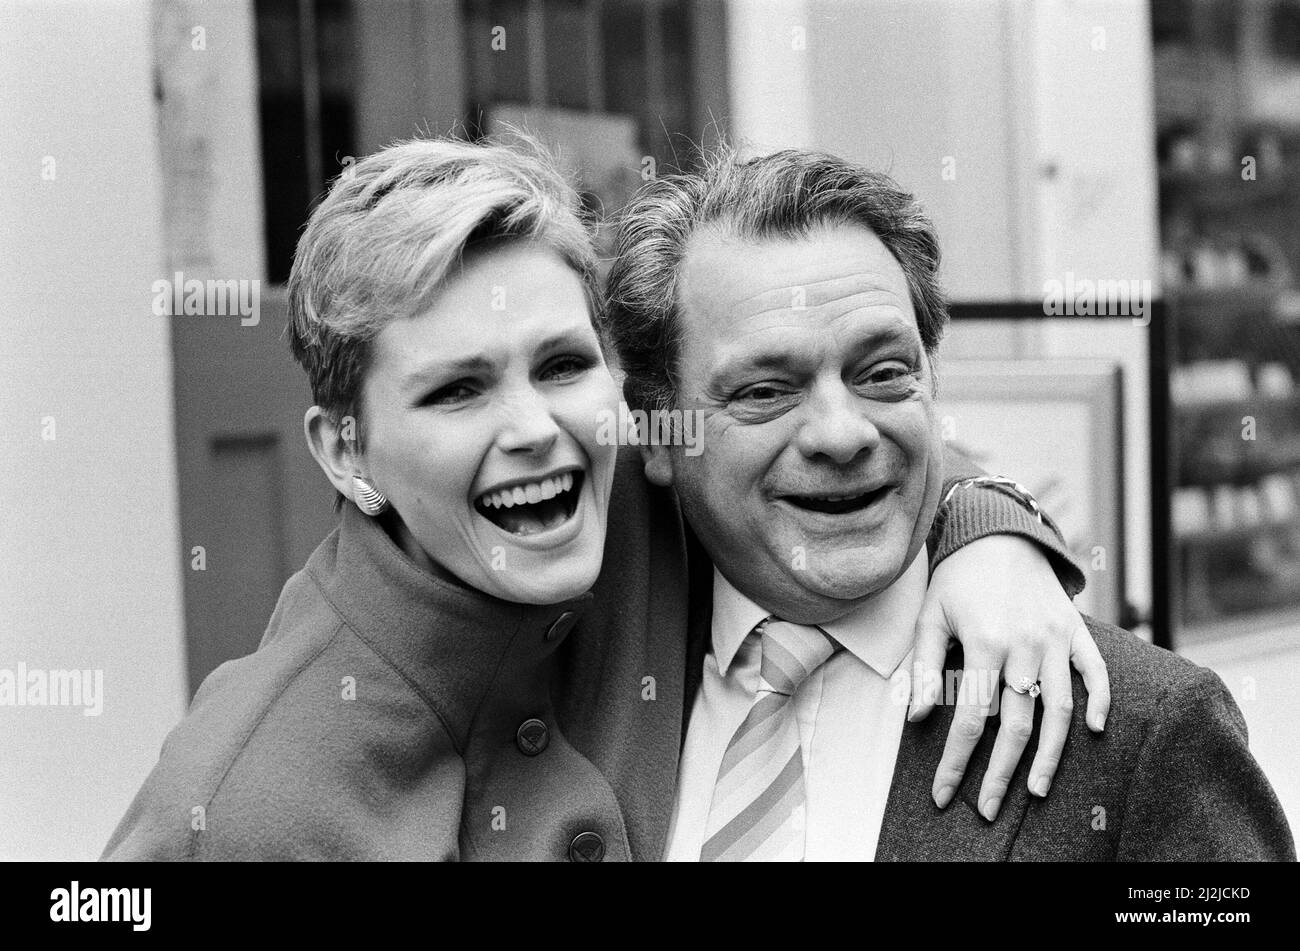 Actor David Jason who stars in Channel 4's production of Porterhouse Blue, with Fiona Fullerton who appears in Hold That Dream. 31st March 1987. Stock Photo